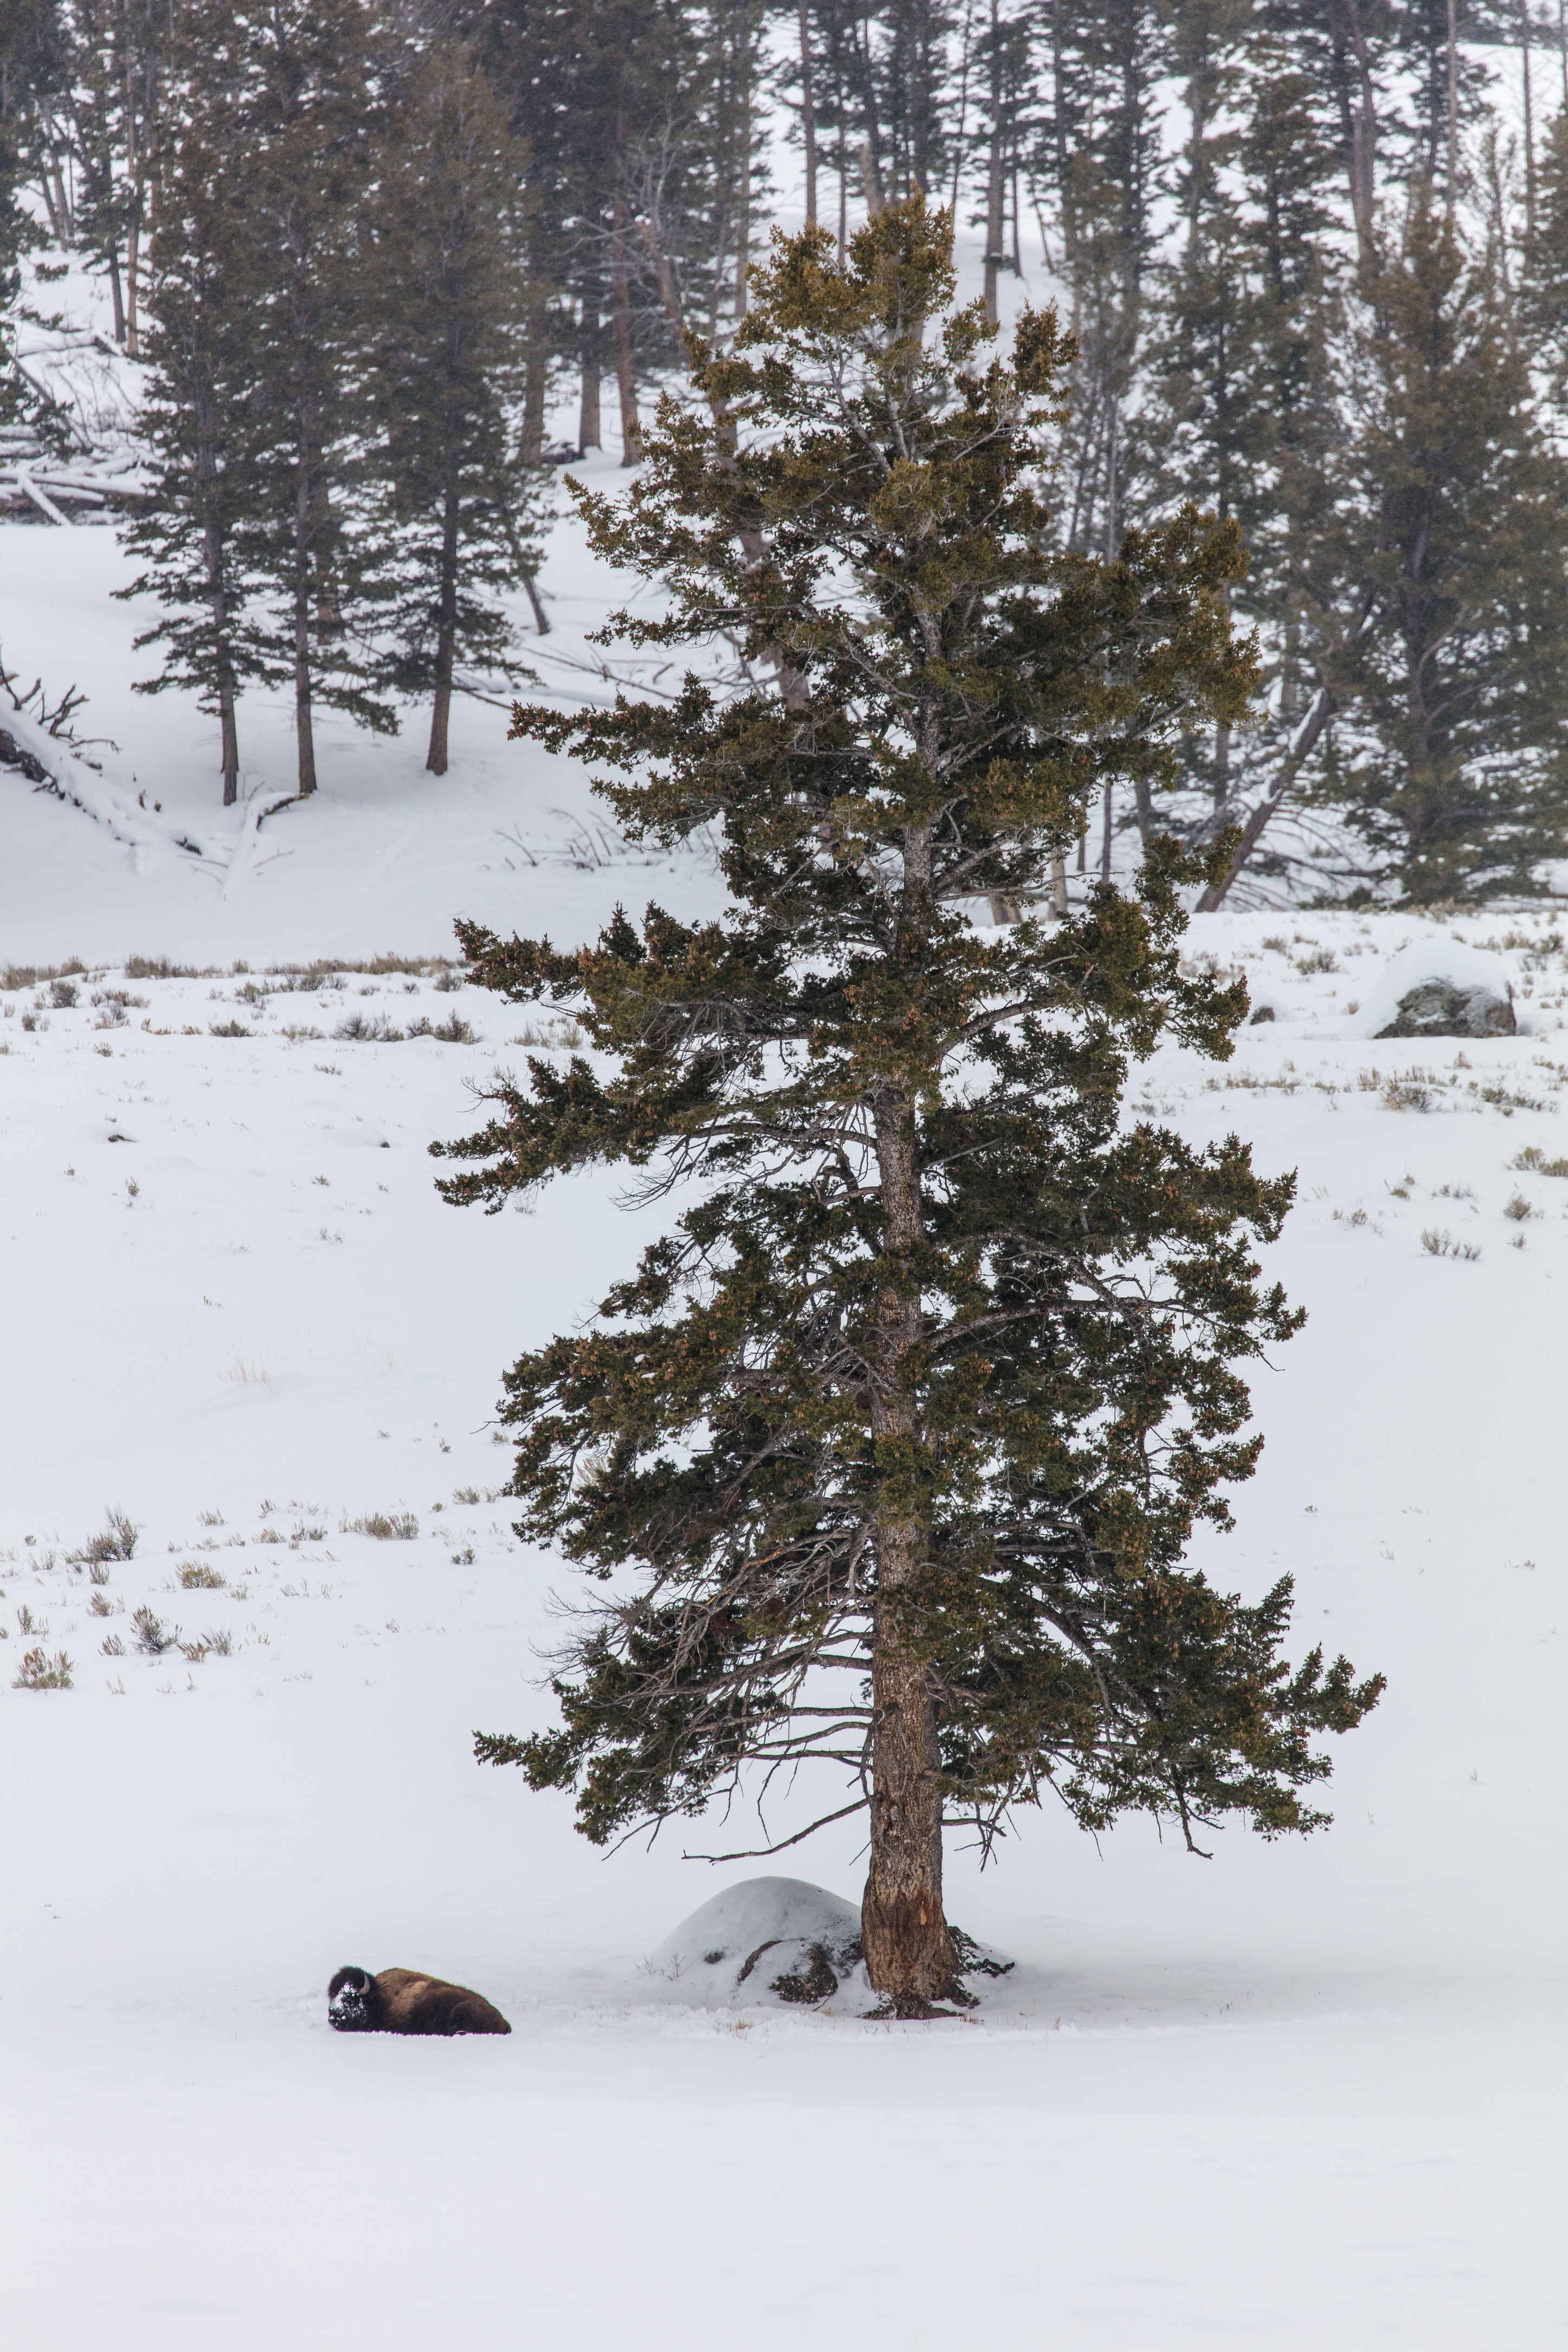 Bison is lying down in the snow under a conifer.